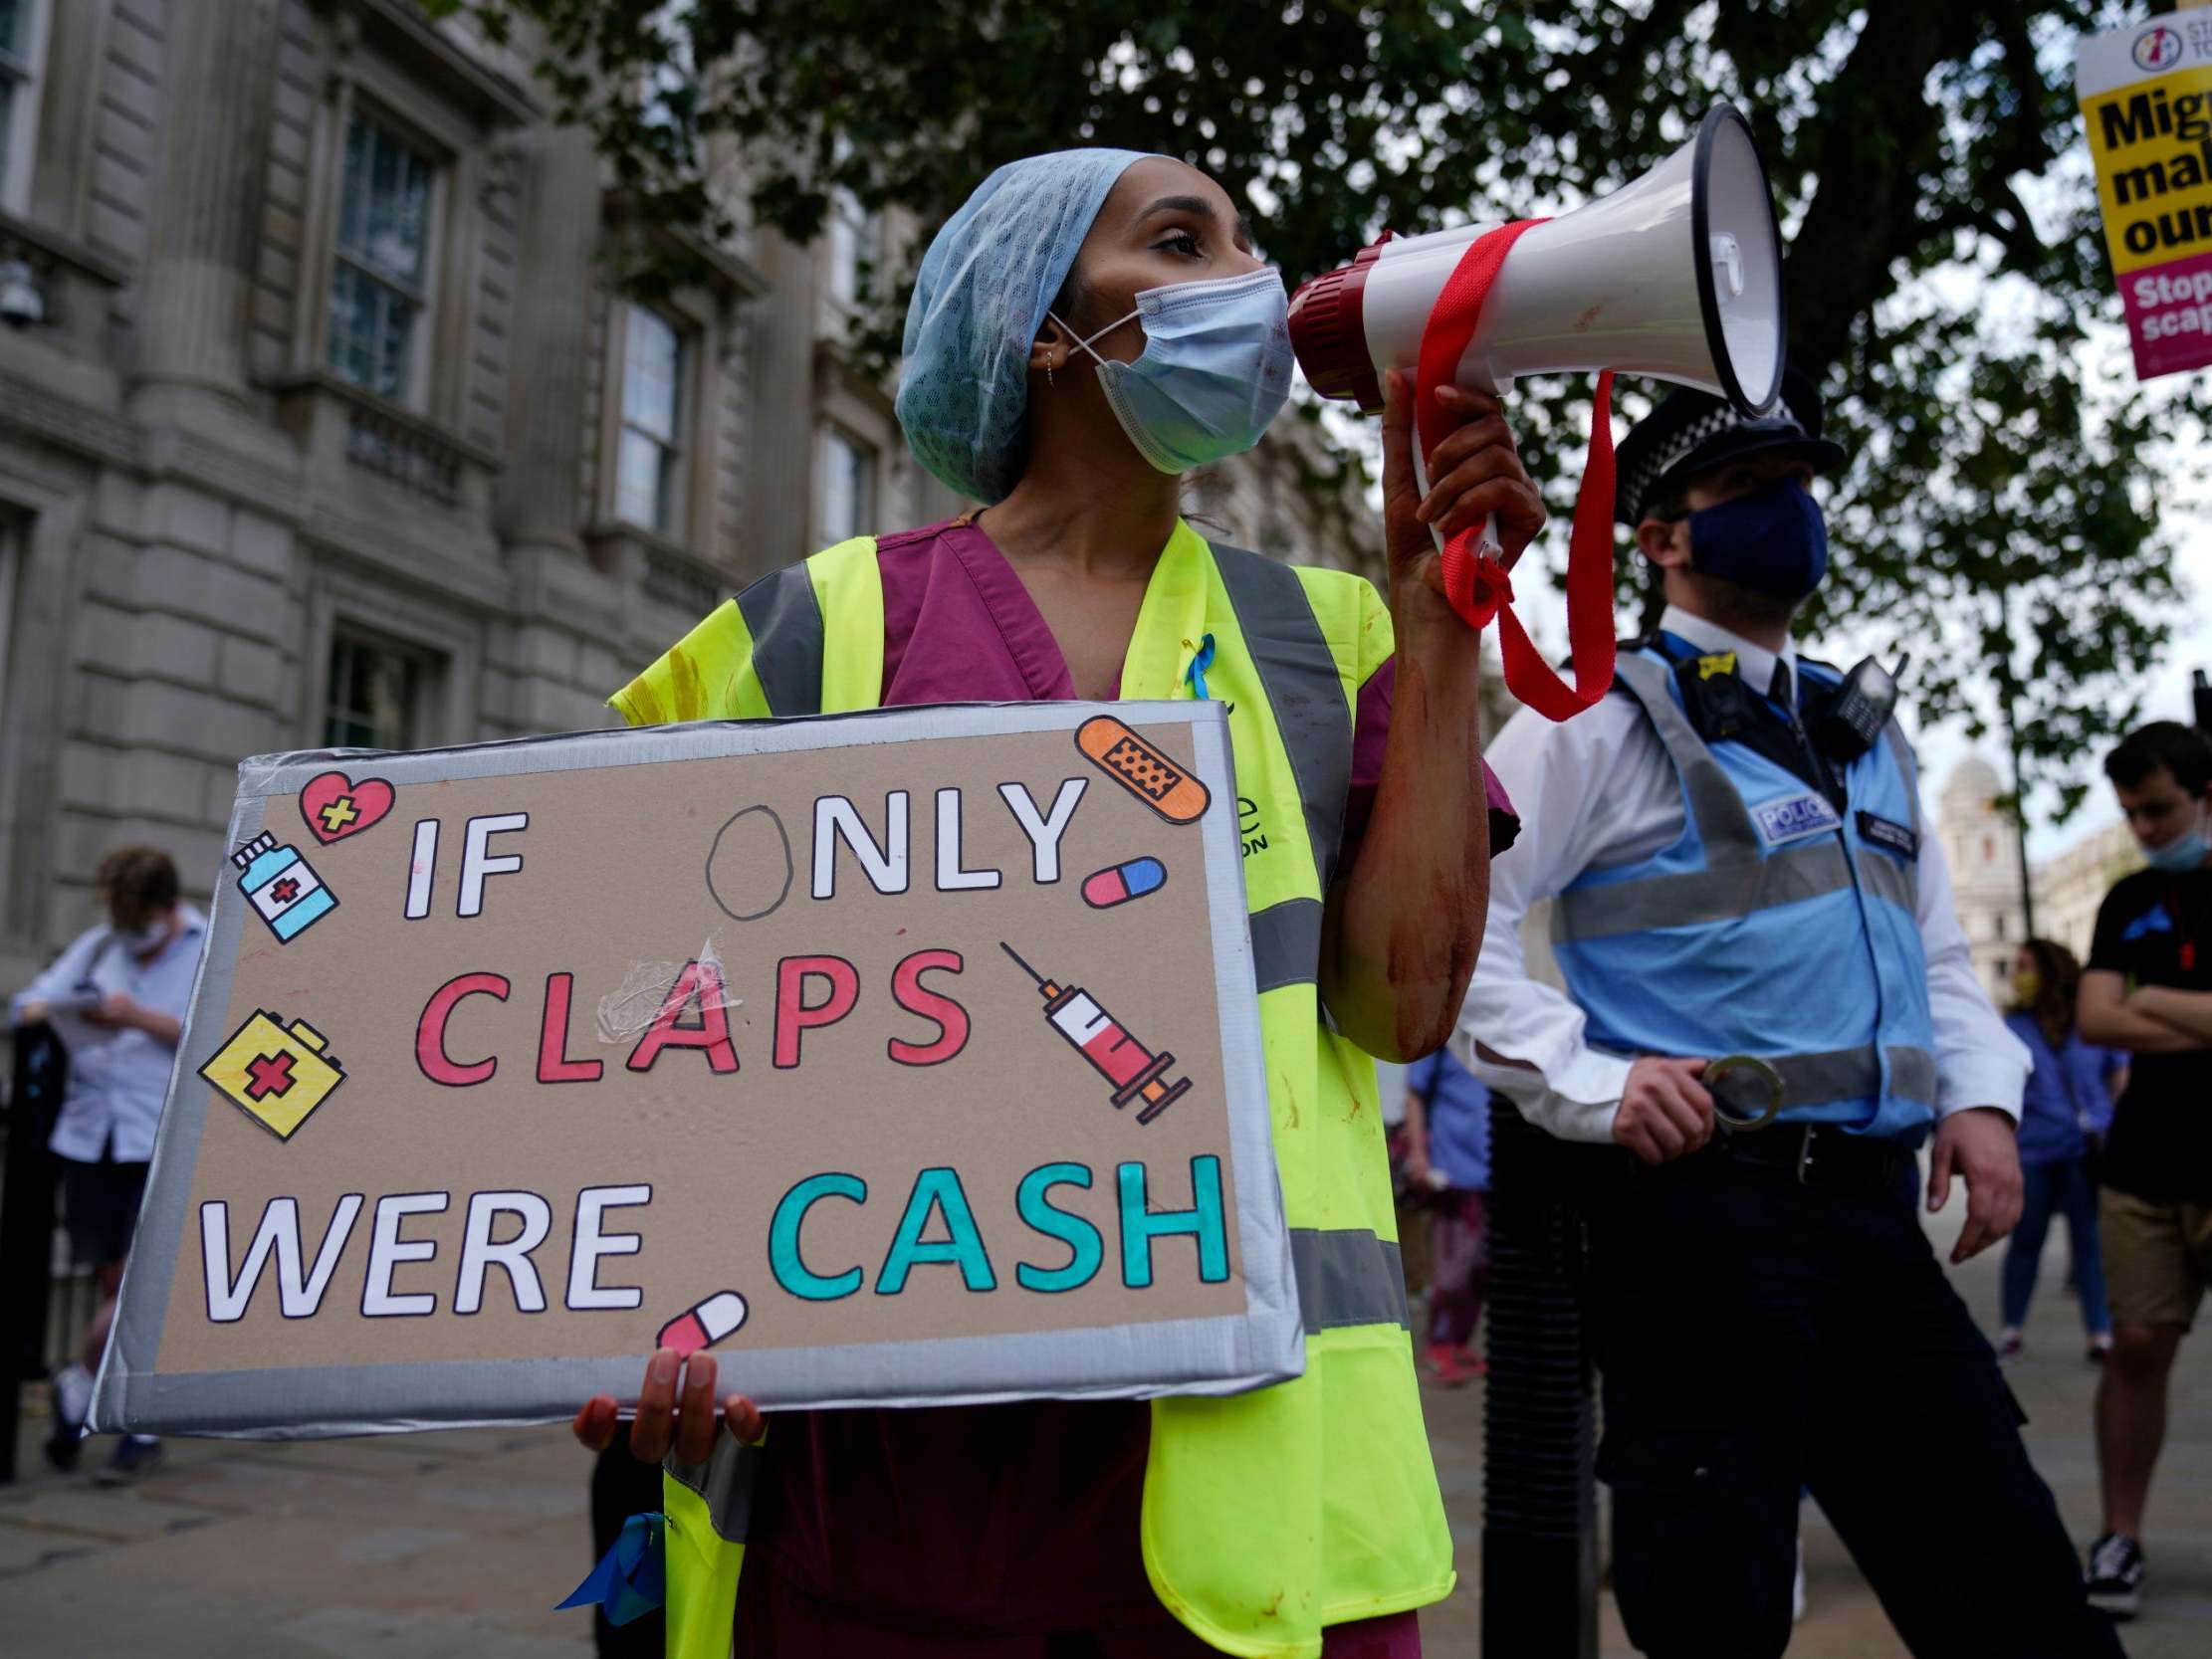 Healthcare unions call for 'pay justice' as coronavirus pandemic follows years of austerity